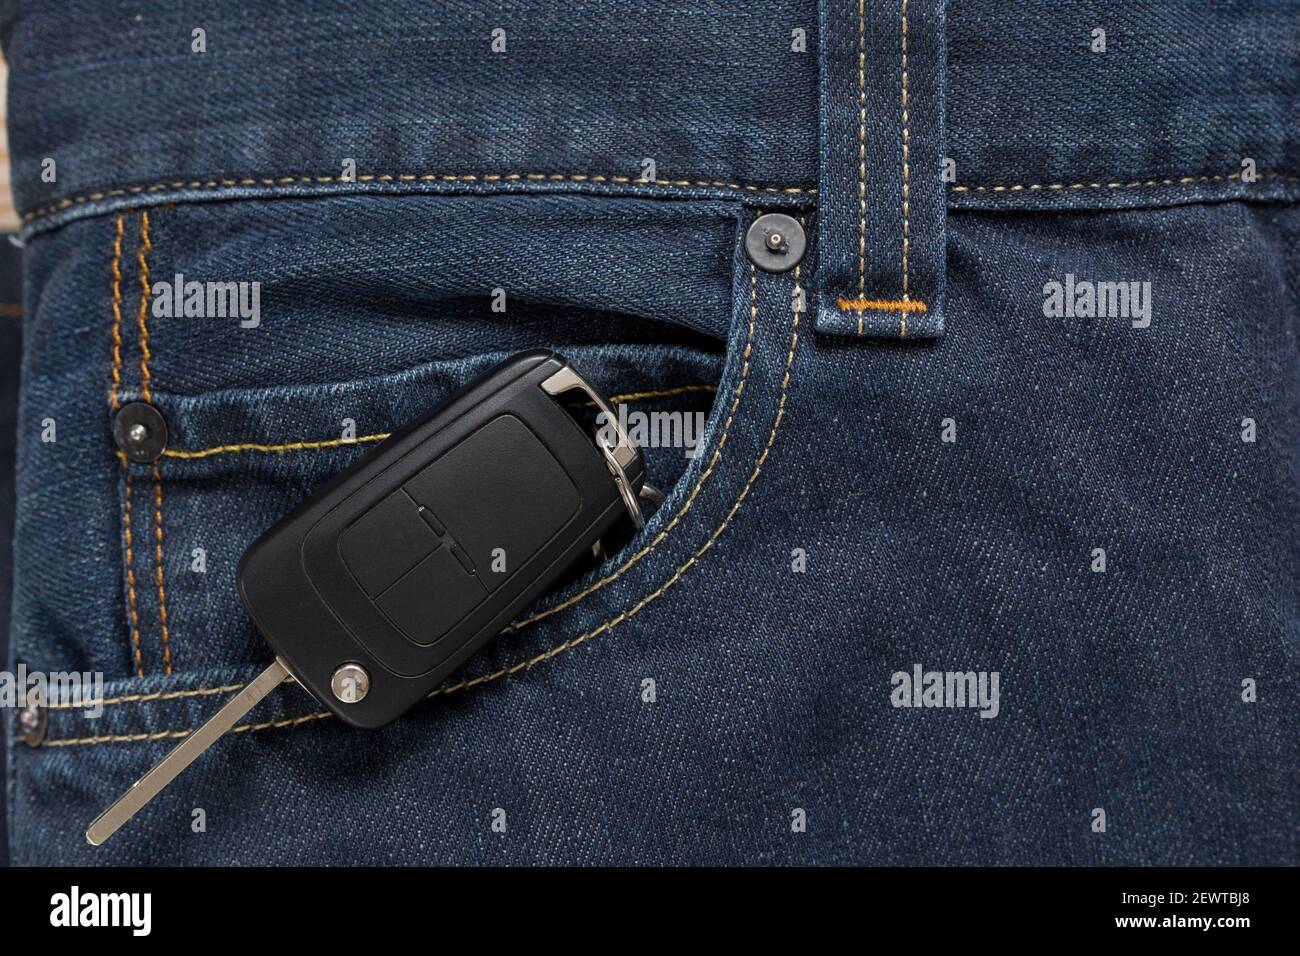 Ignition key is lying in side pocket of blue jeans. Modern lifestyle. Stock Photo